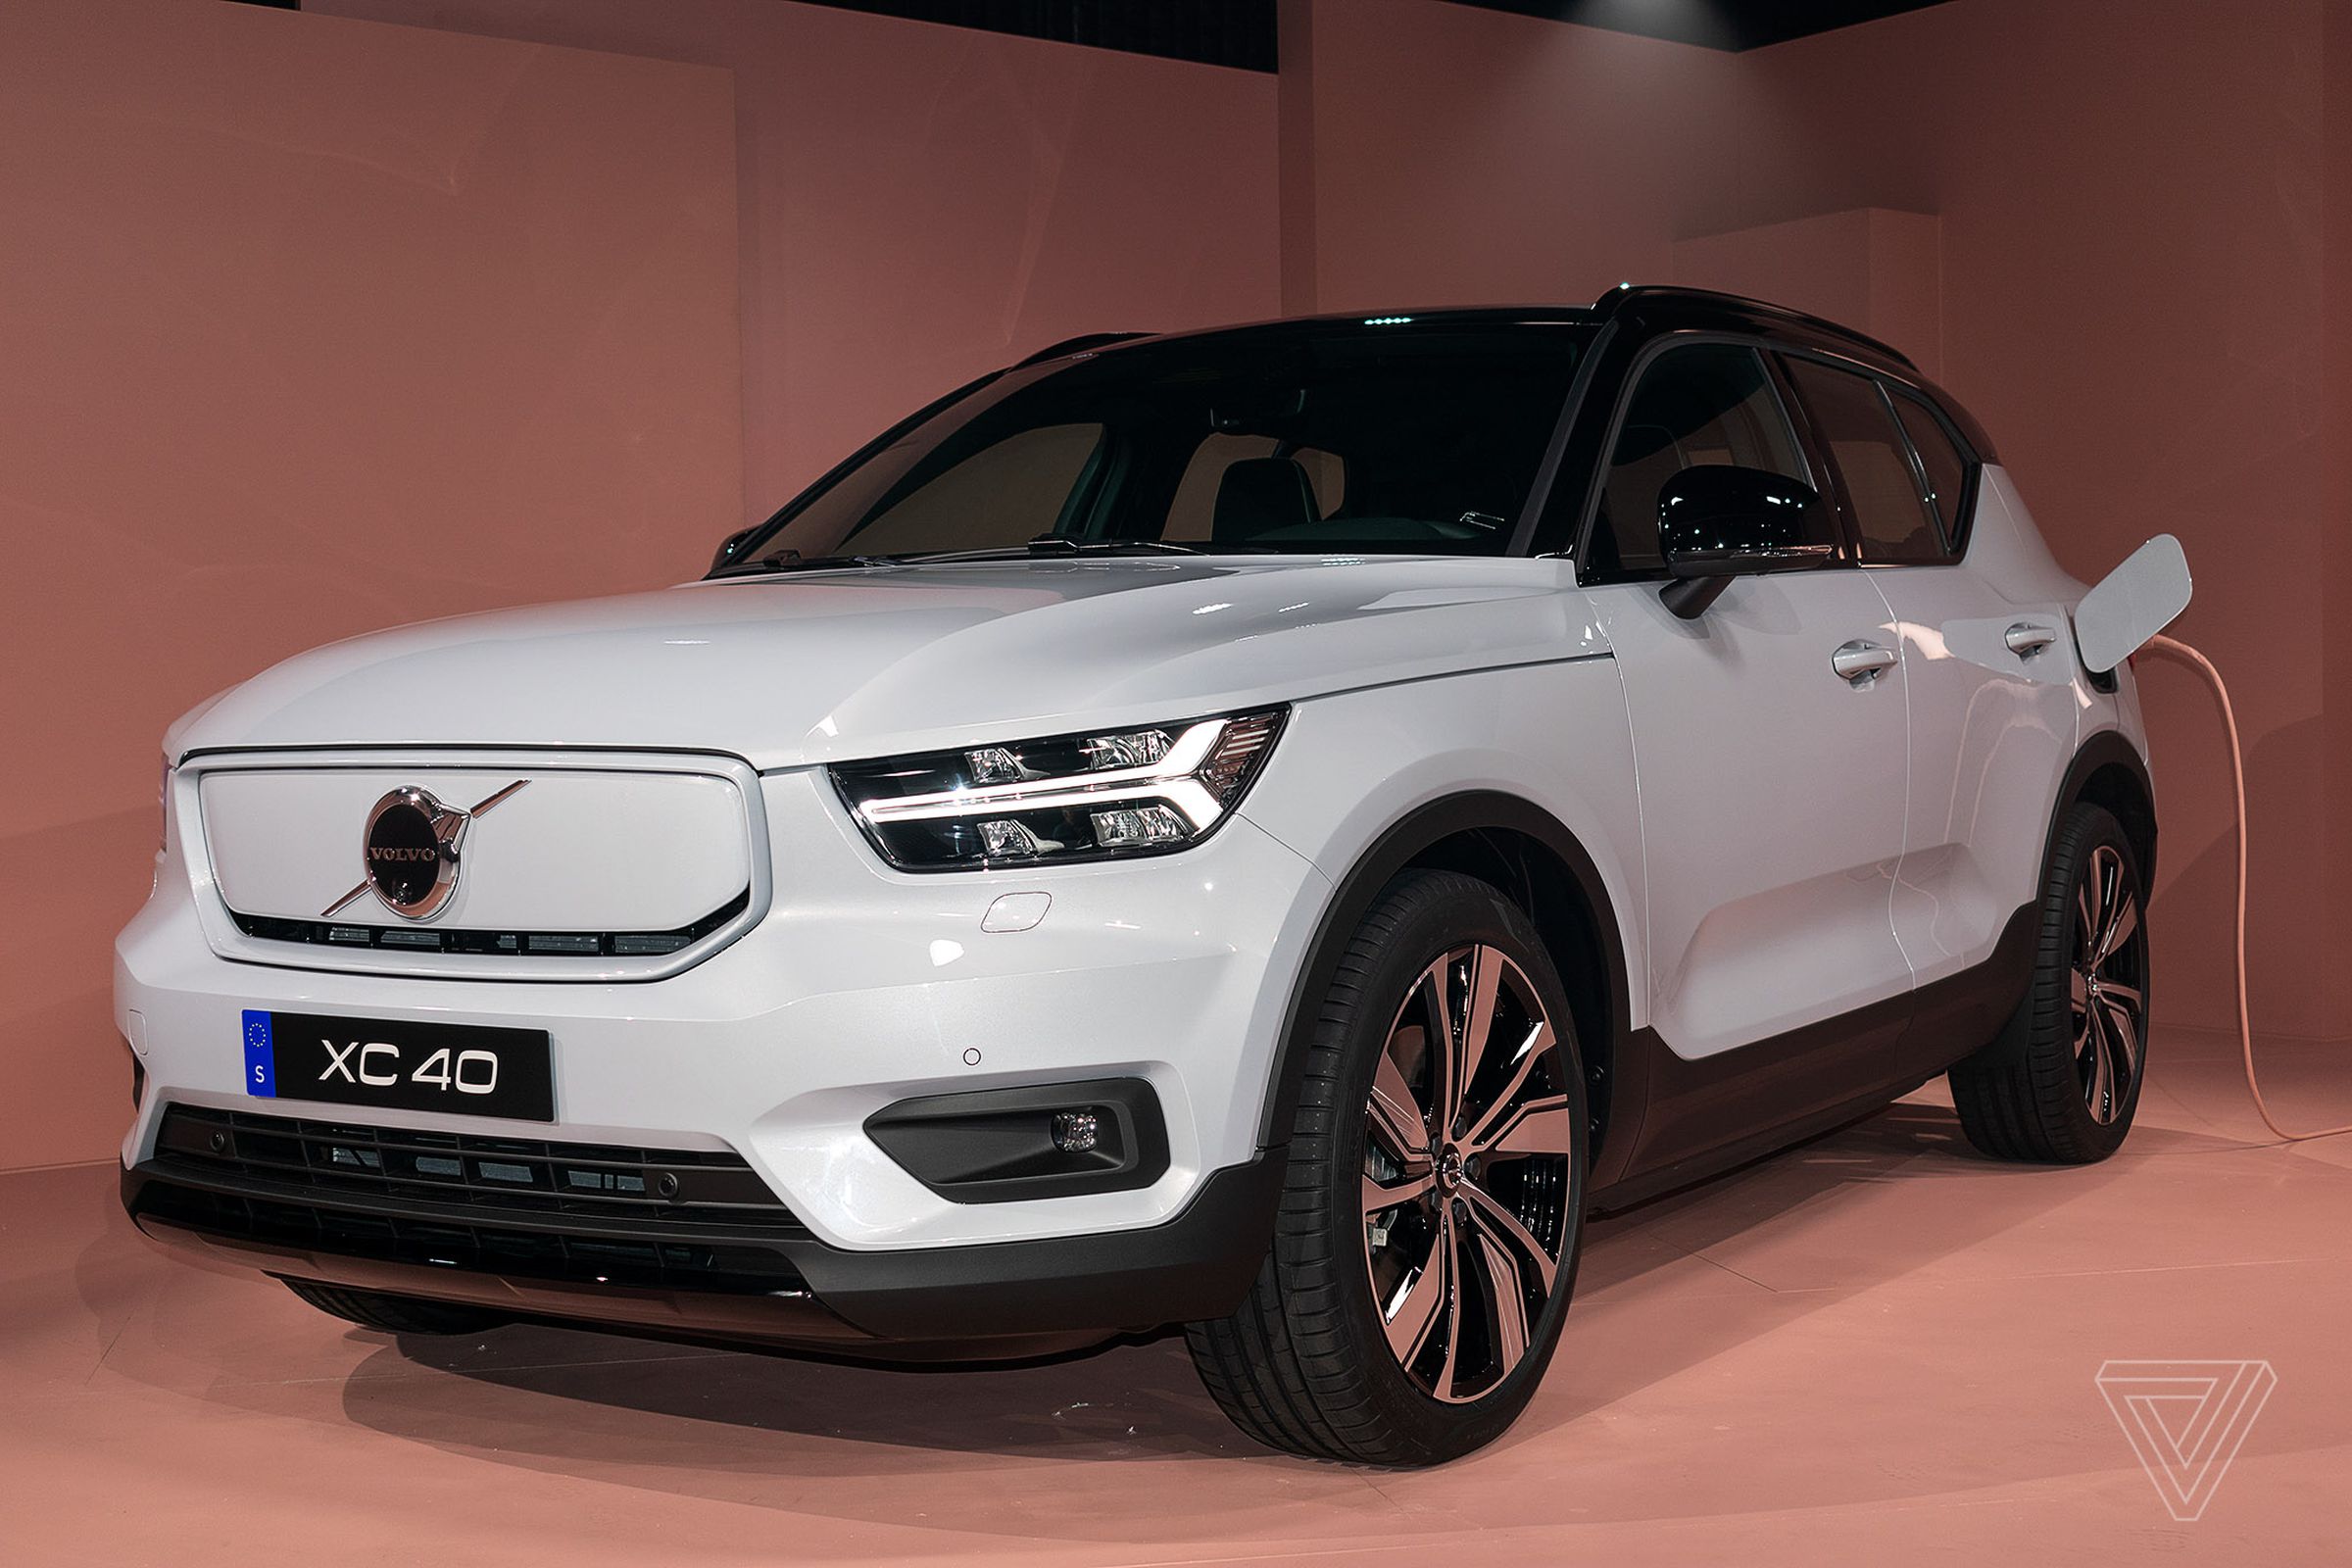 SPA2 will also underpin the automaker’s upcoming electric vehicles, the Polestar 3 SUV and the XC40 Recharge.